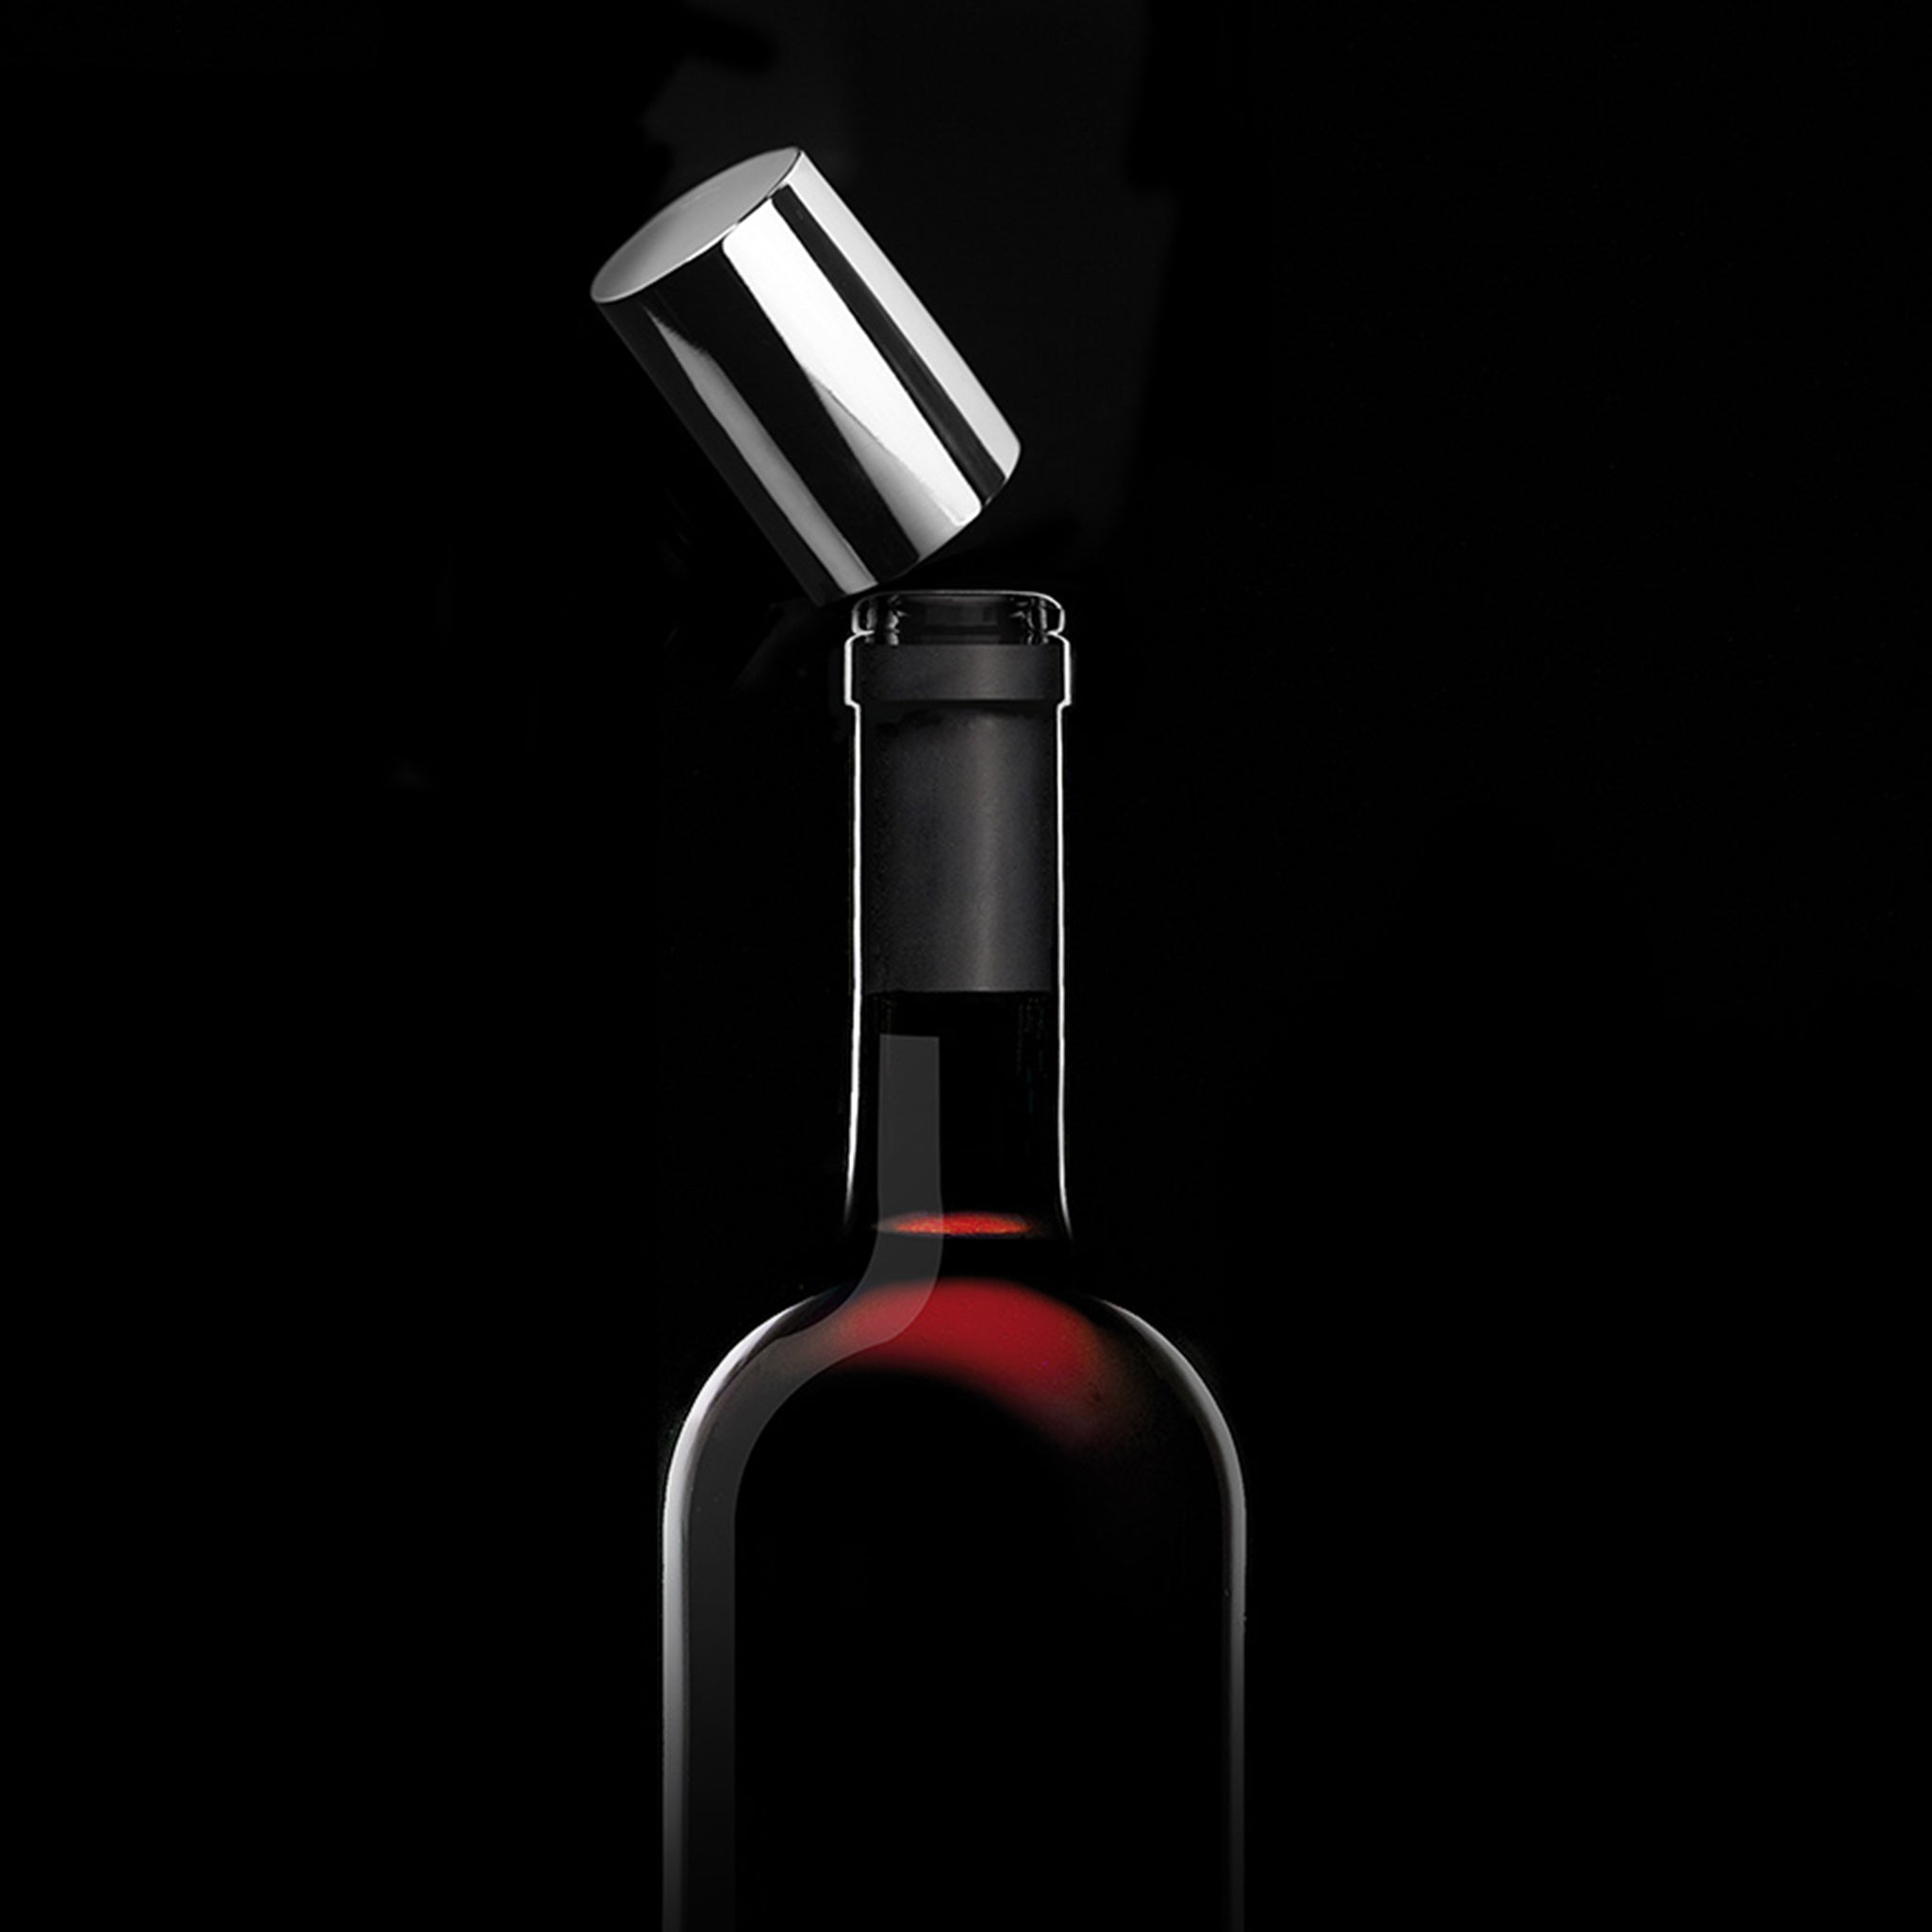  Vagnbys® Wine Stopper by Ethan+Ashe Ethan+Ashe Perfumarie